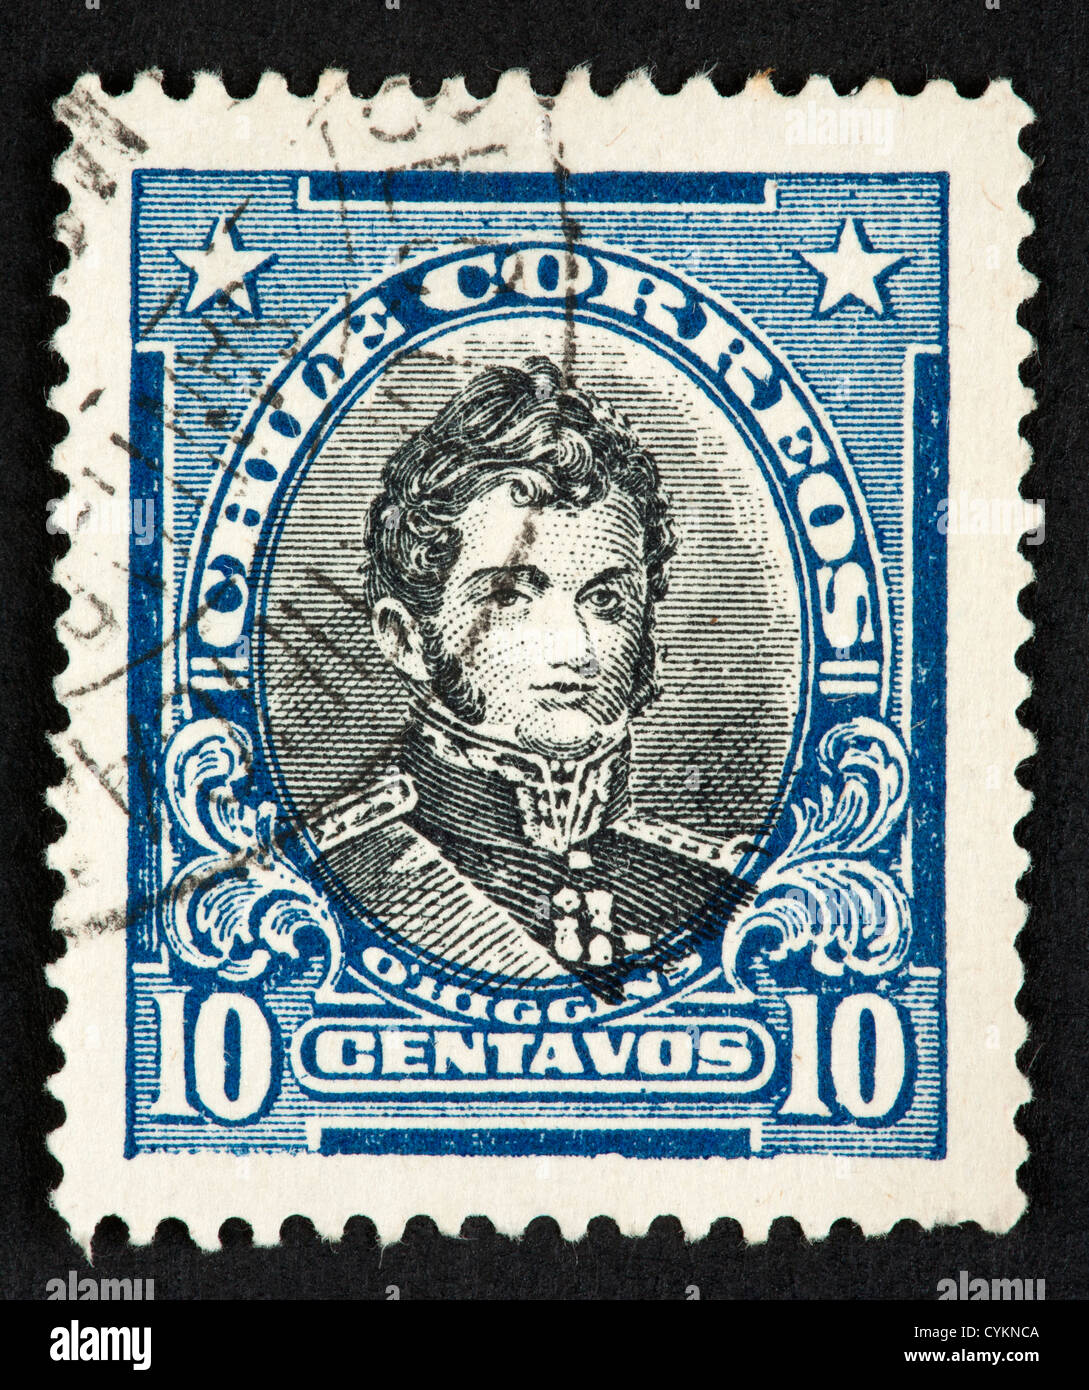 Chilean postage stamp Stock Photo